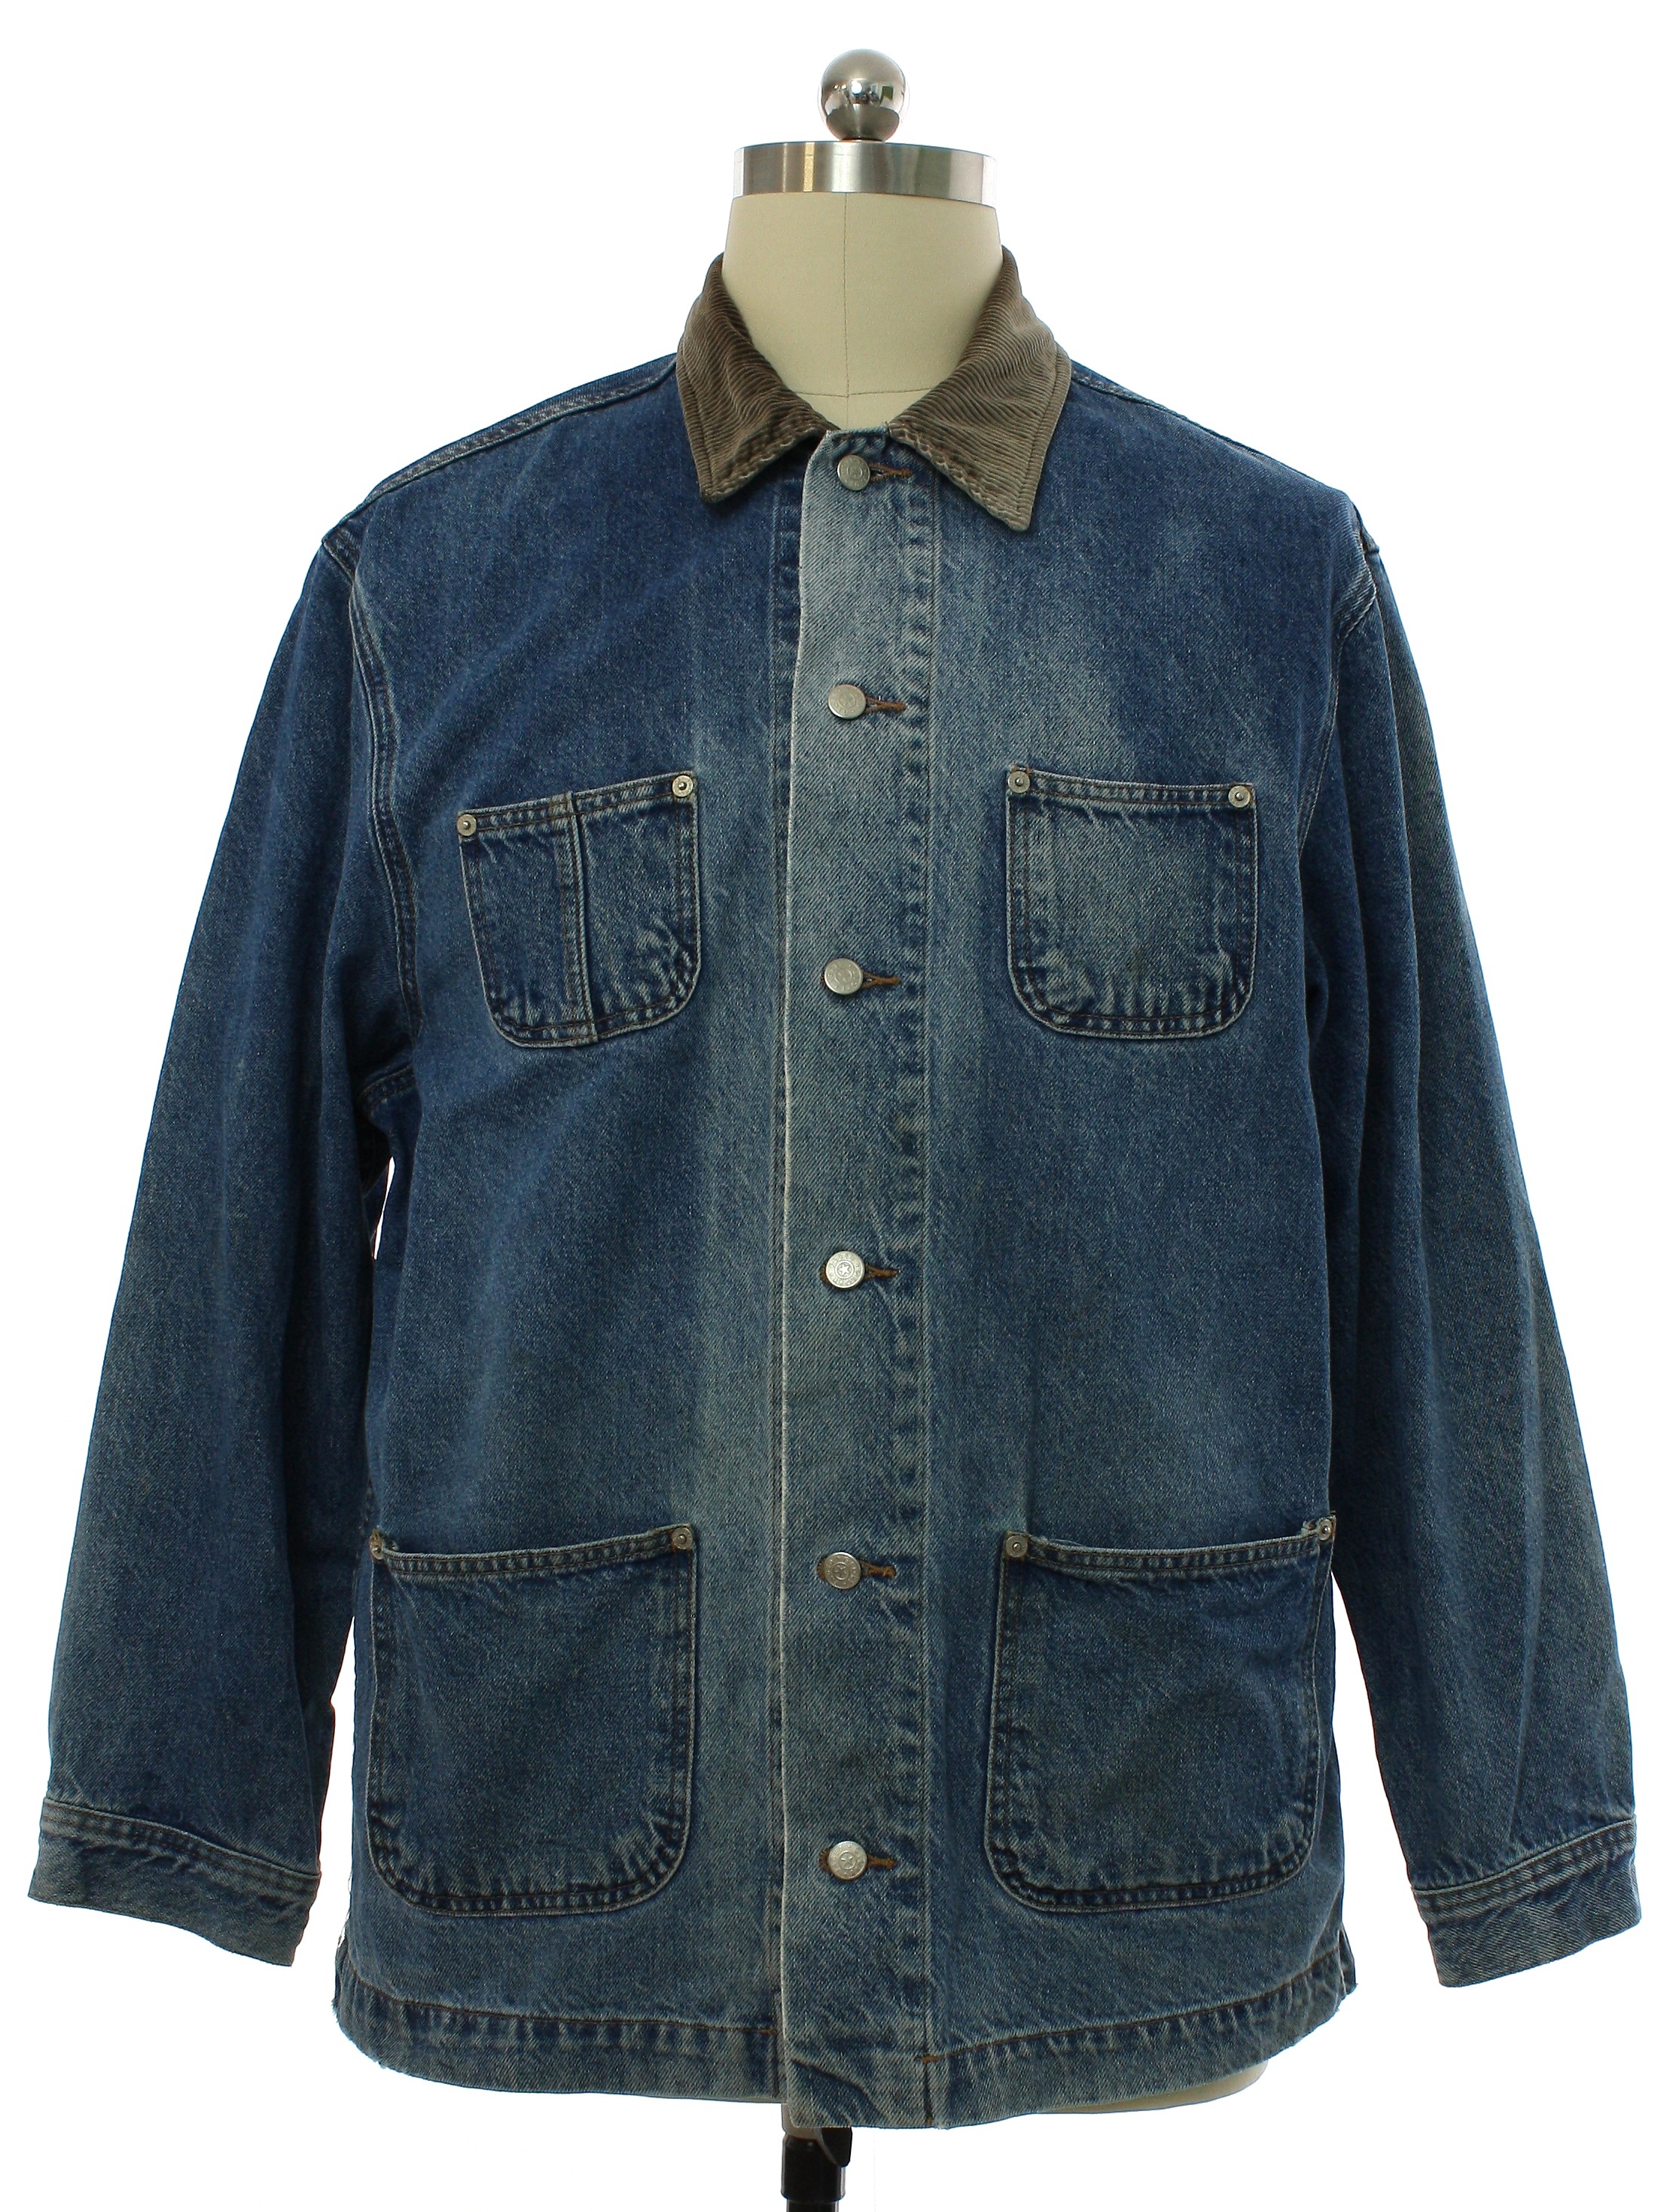 Retro 80s Jacket (Faded Glory Authentic Jeanswear) : Late 80s or Early ...